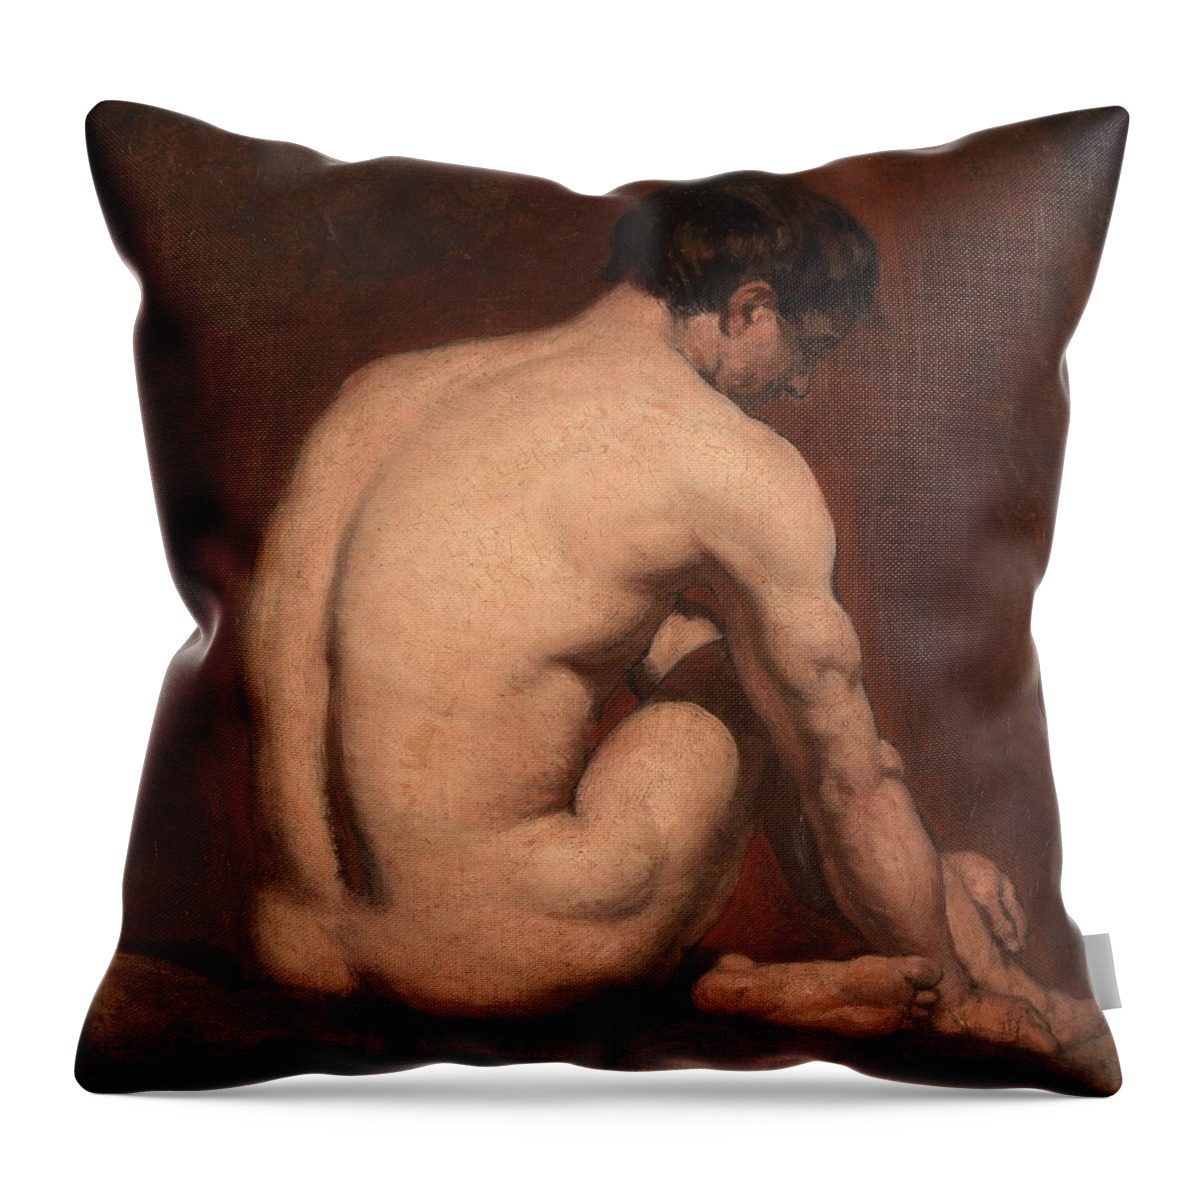  Nude Throw Pillow featuring the painting Male Nude from the Rear by William Etty